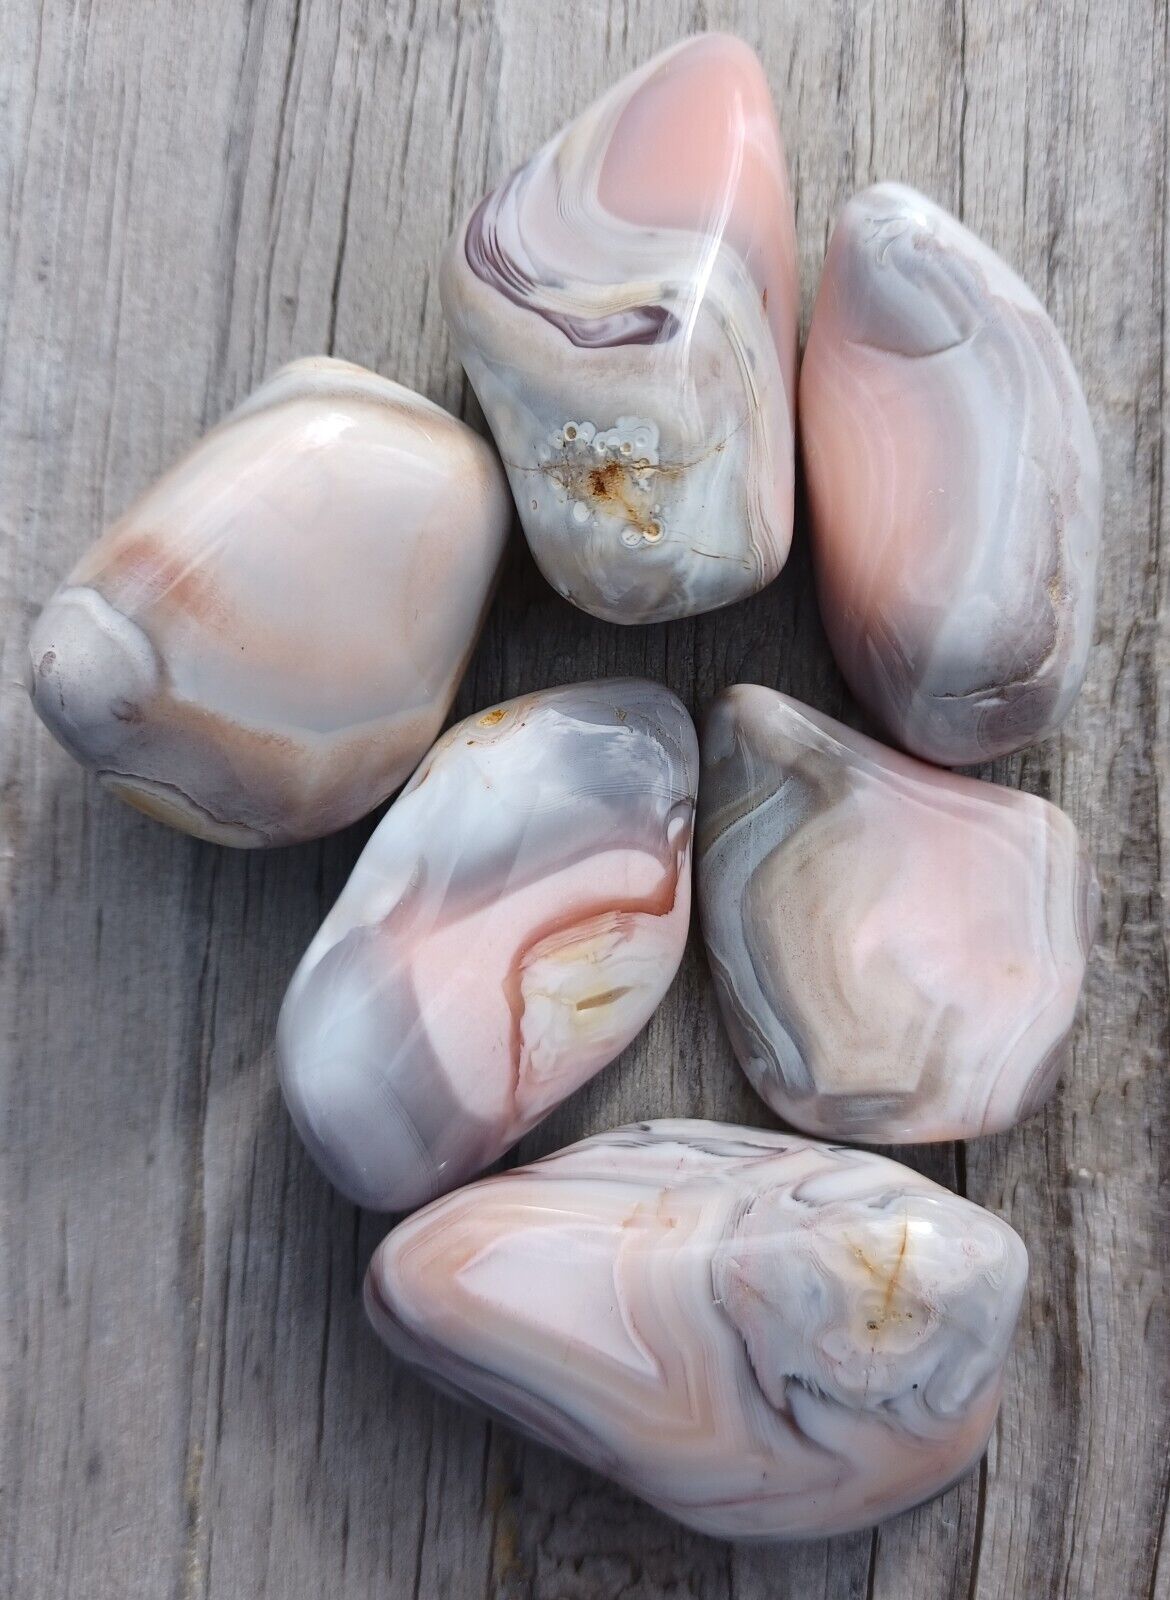 Peach and gray Botswana Agates 6 pieces gorgeous 1 inch tumbled polished